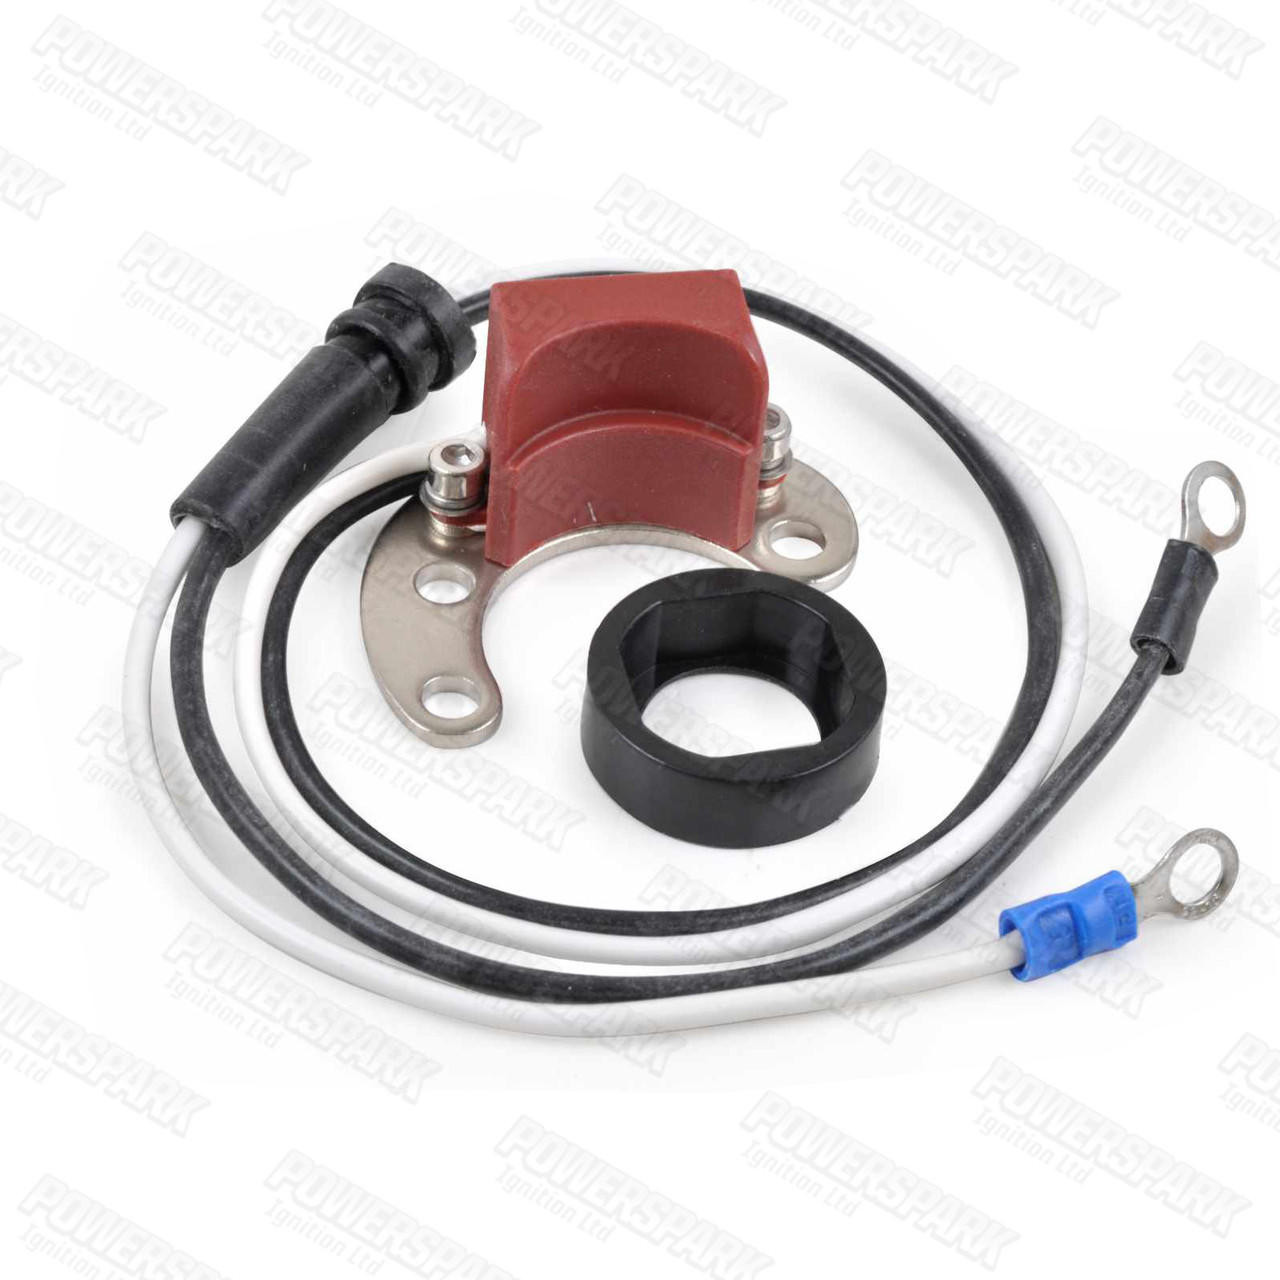  Powerspark Electronic Ignition Kit for Lucas D3A4 Distributor Positive Earth (K33pp)